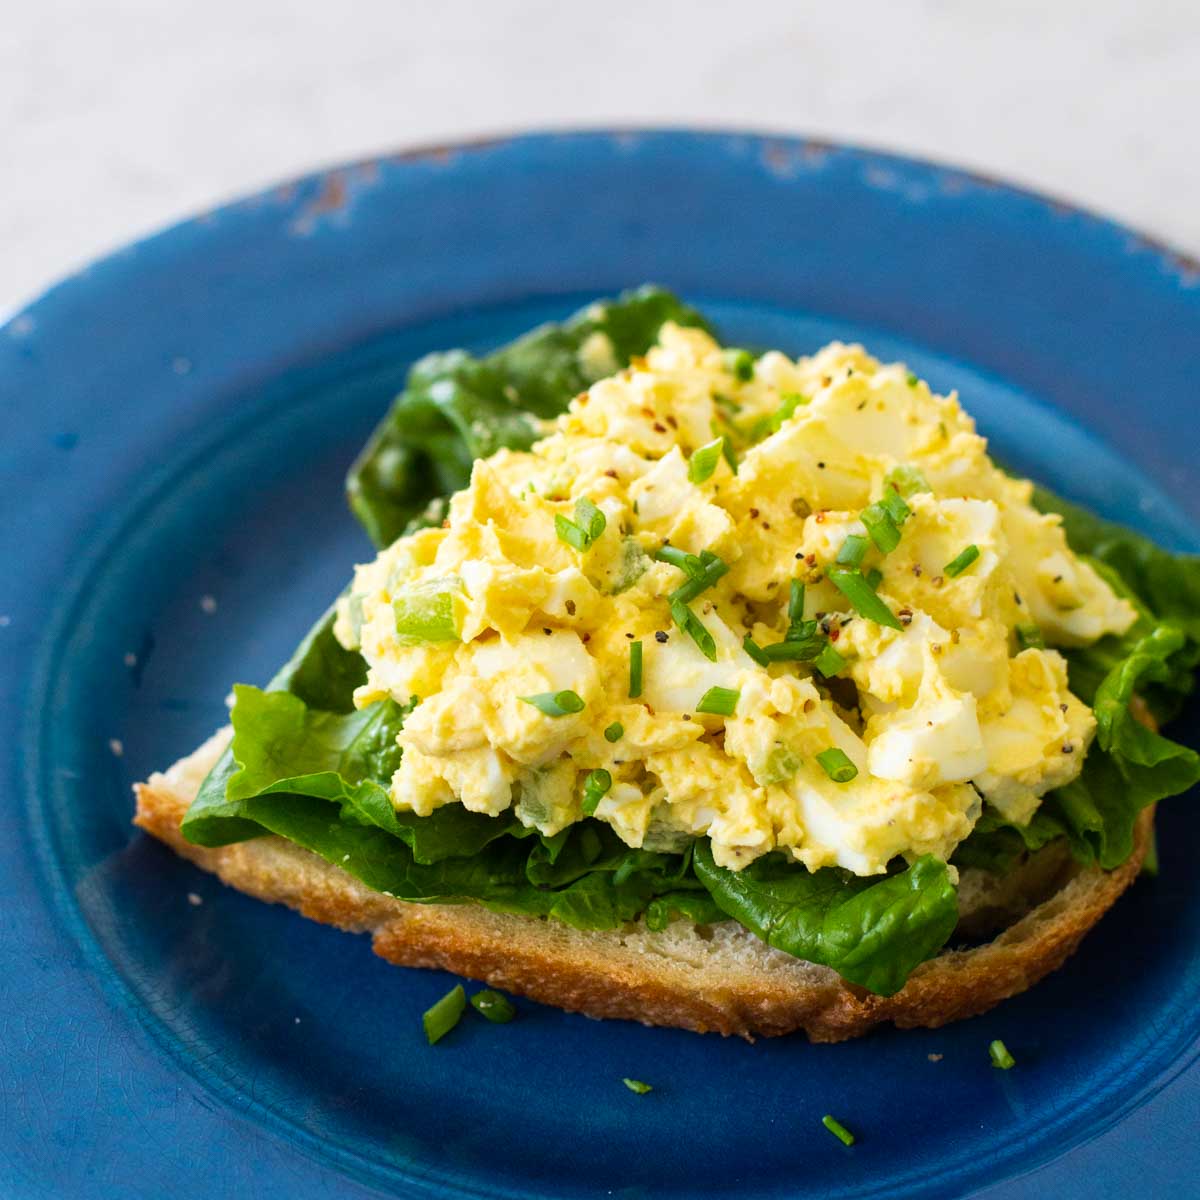 An open faced sandwich shows the texture of the egg salad.